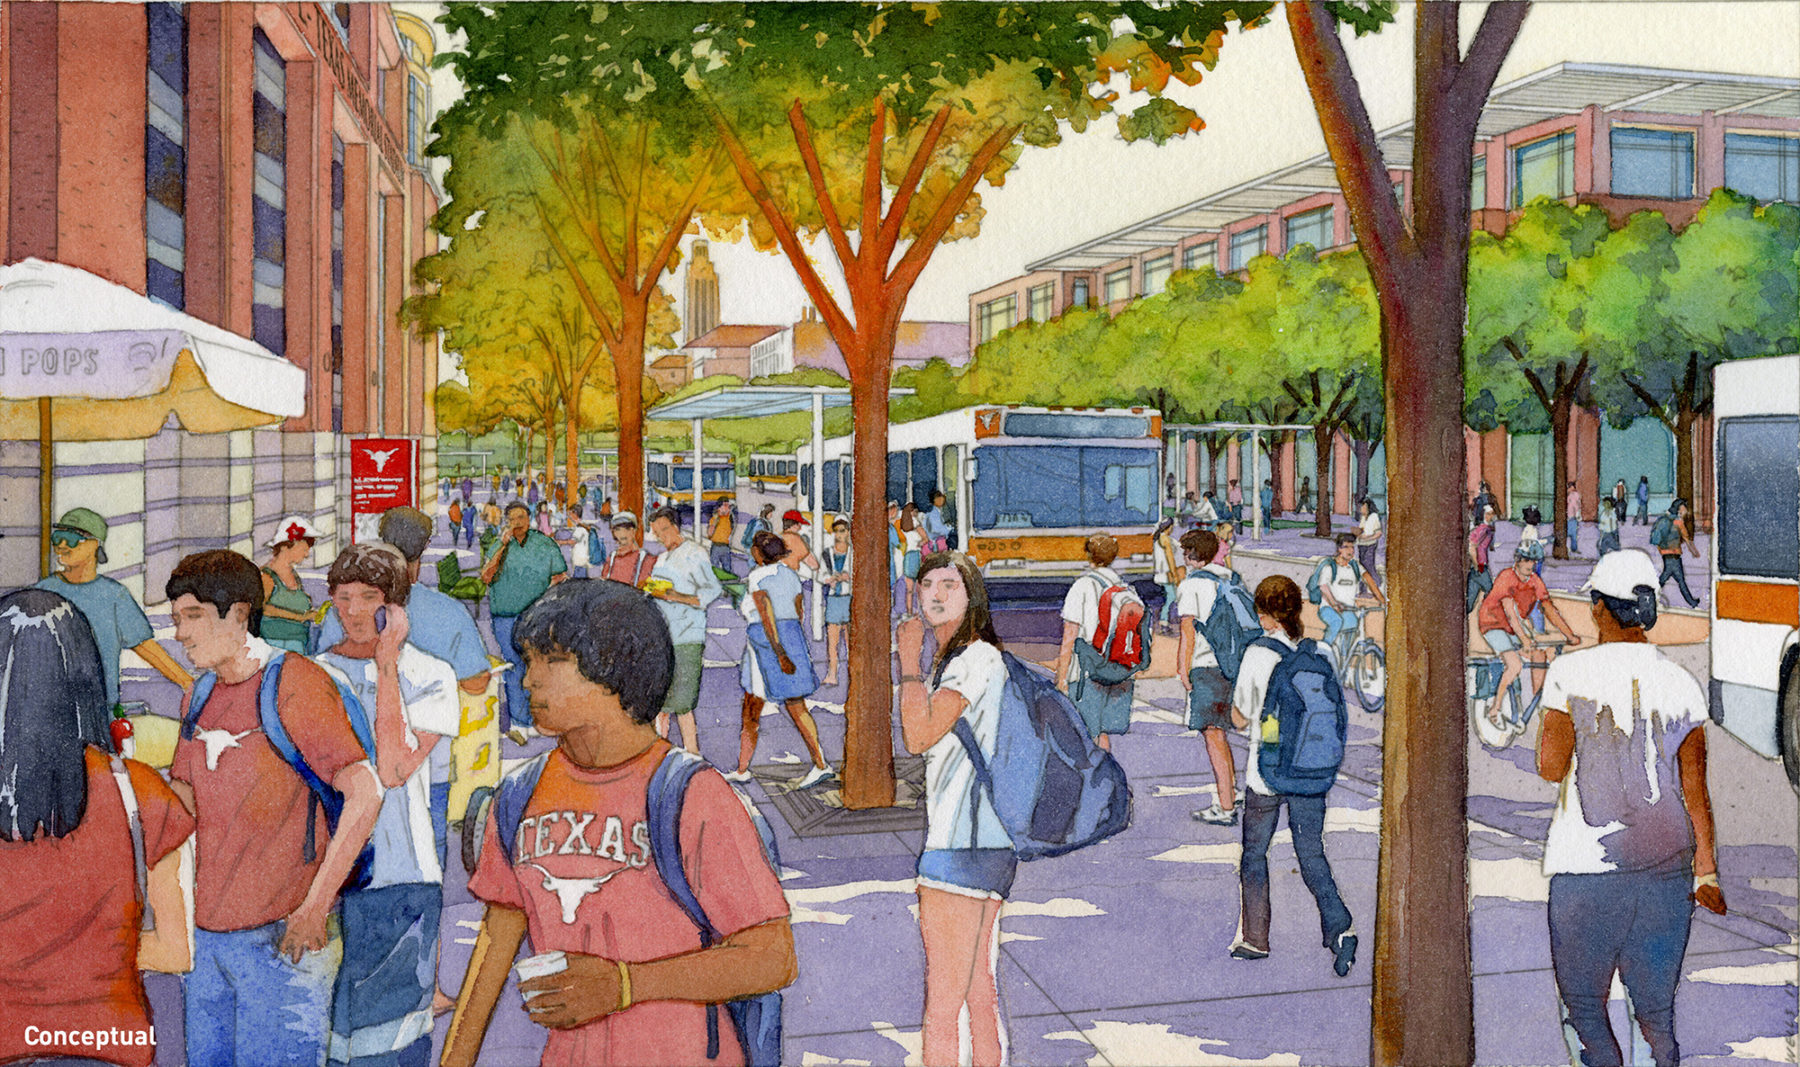 Conceptual watercolor rendering of students gathered on a street